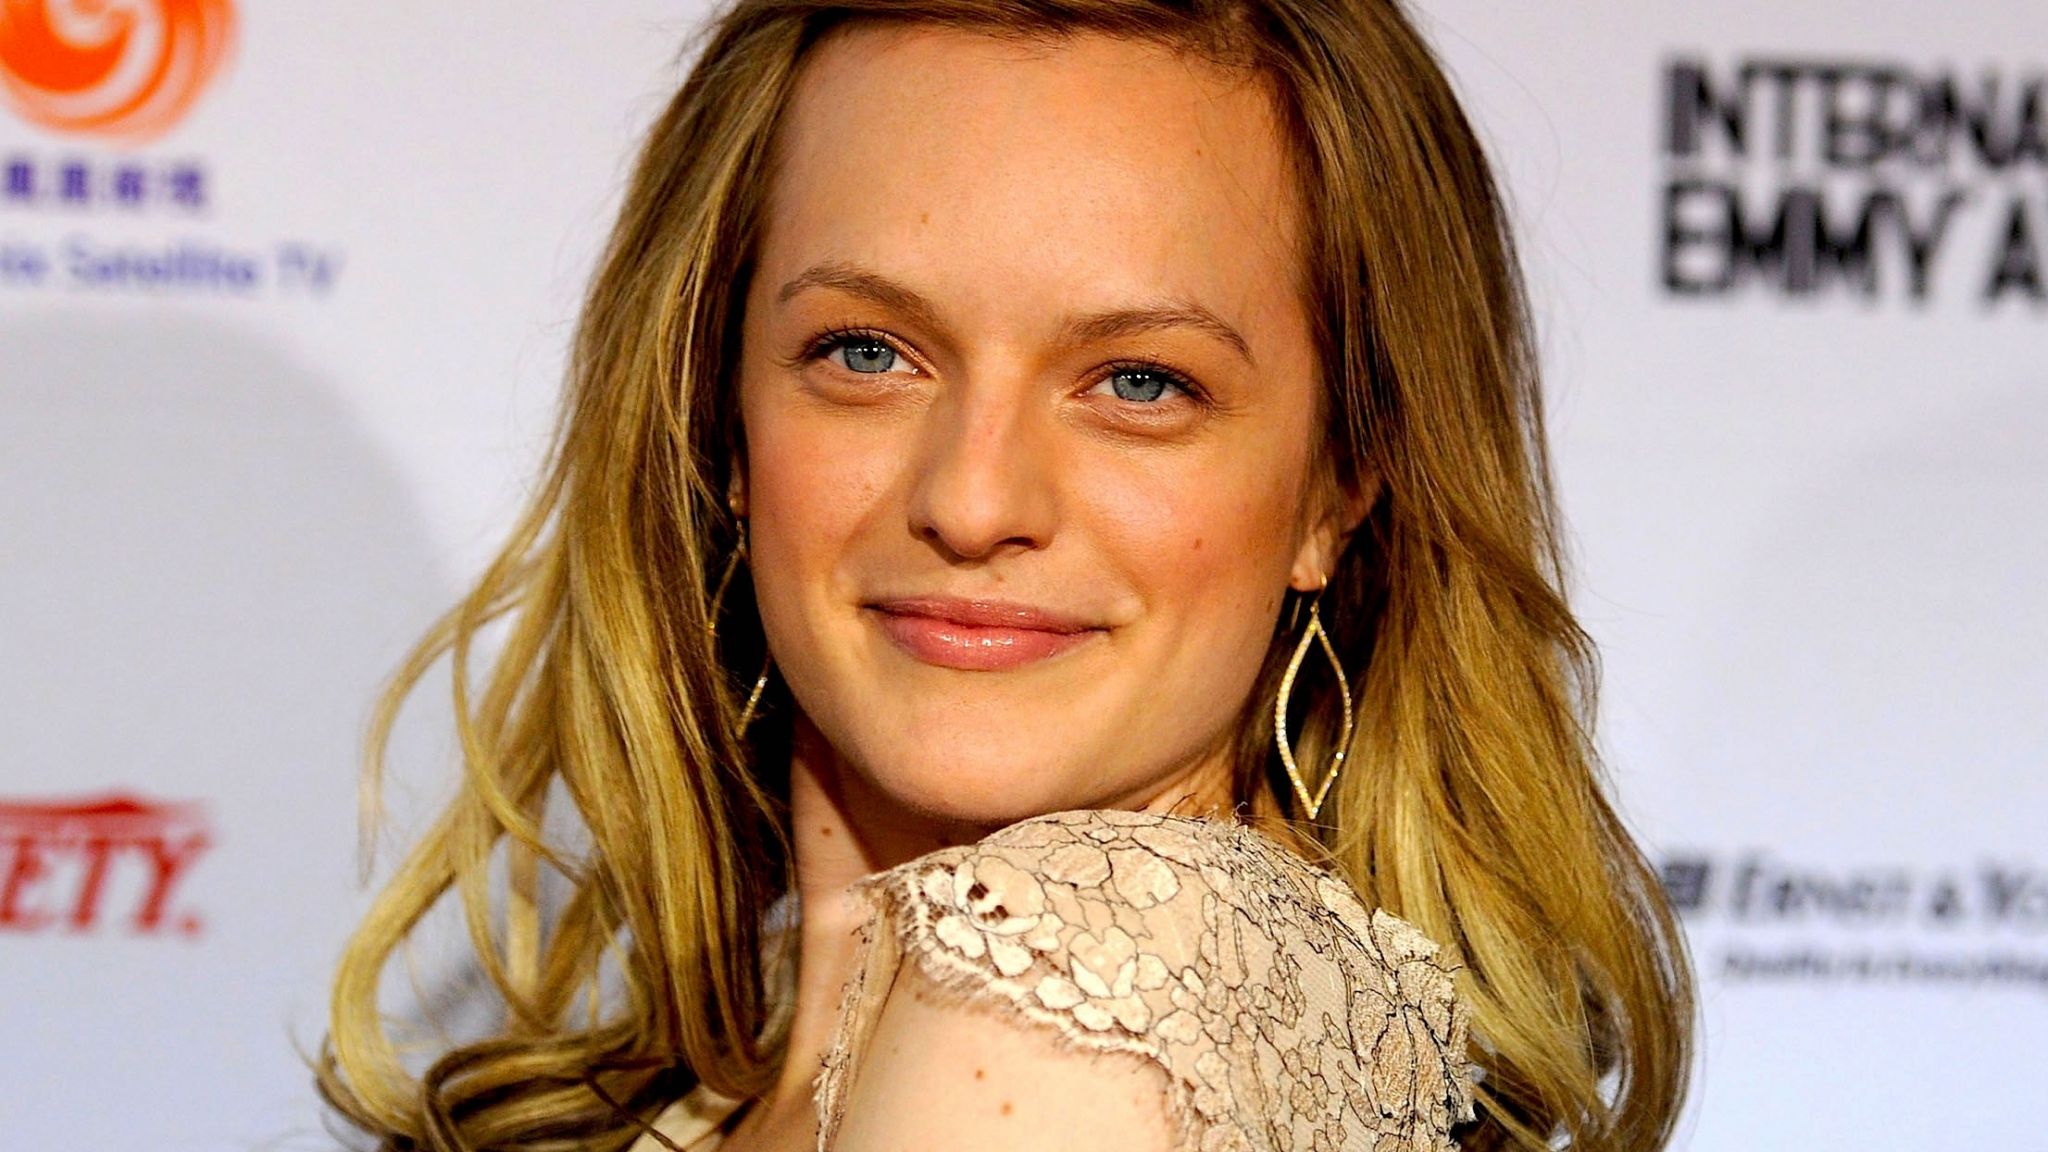 Download 2048x1152 wallpaper elisabeth moss, blonde, smile, dual wide, widescreen, 2048x1152 HD image, background, 4714